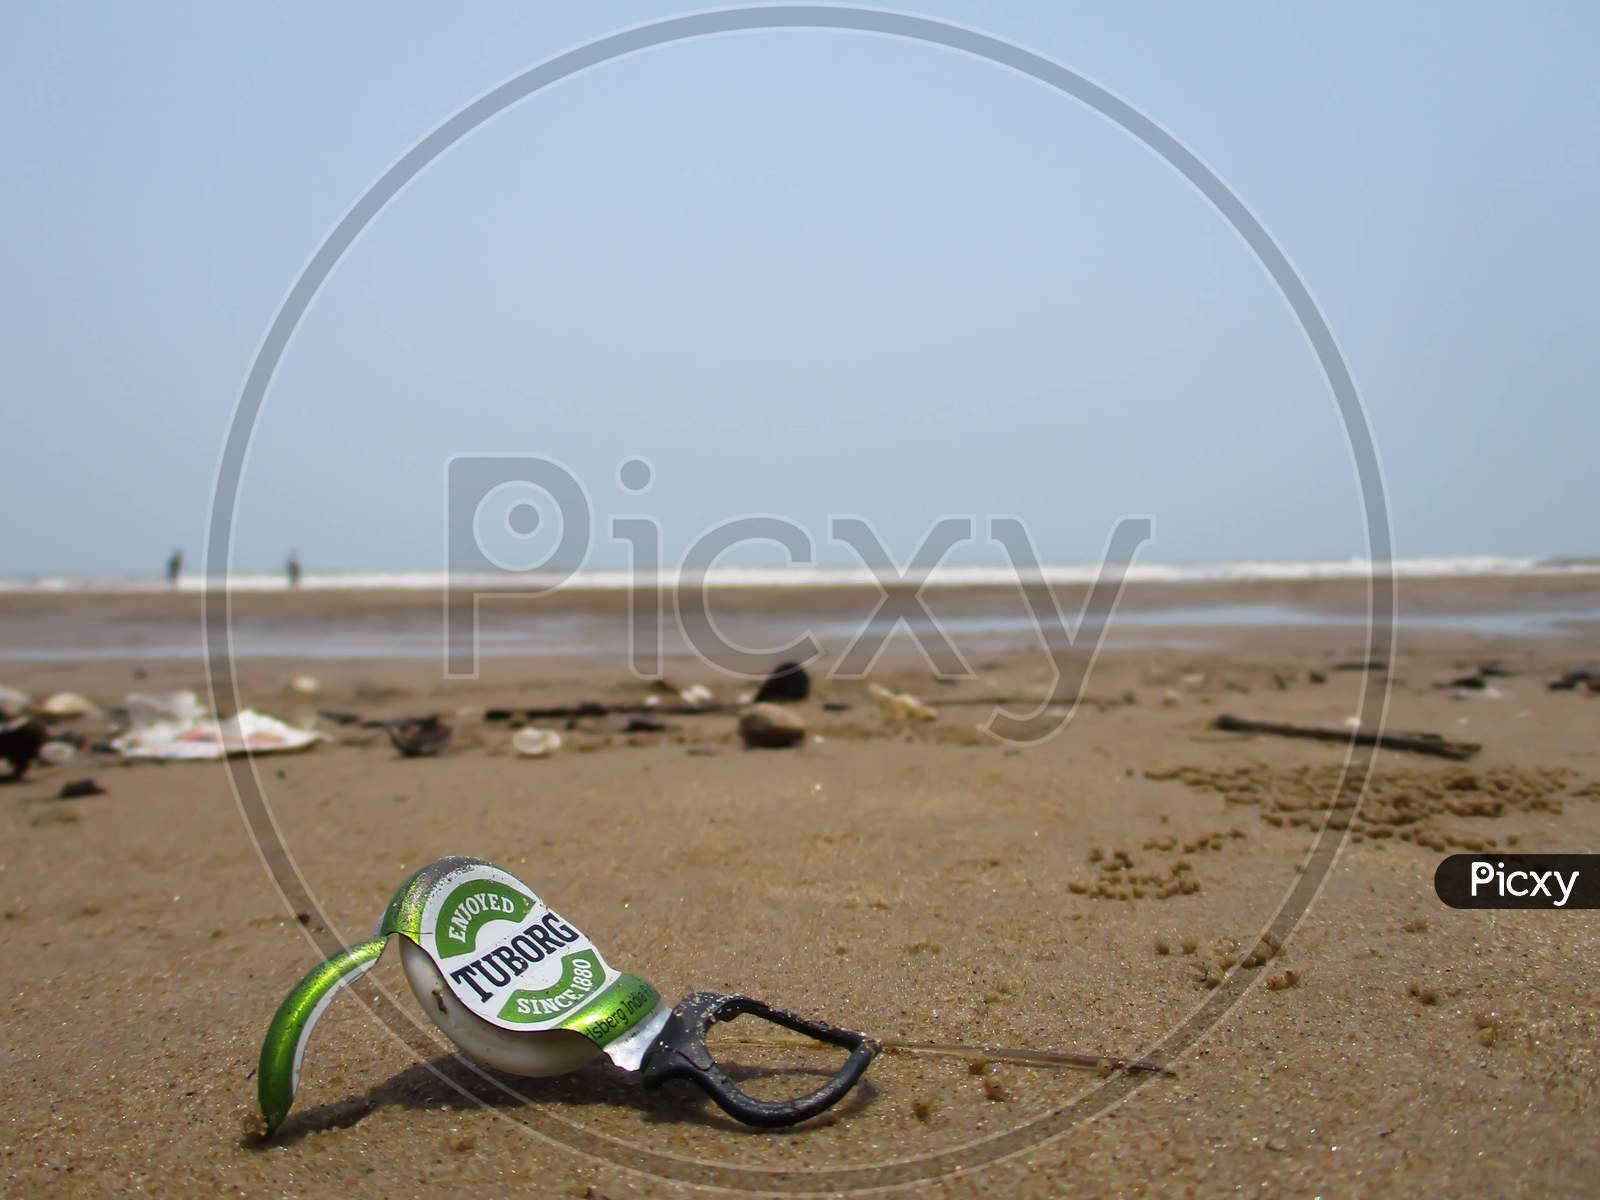 West Bengal , India - May 14, 2019 : The Cork Of A Tub Org Zero Beer Bottle Is On The Beach .